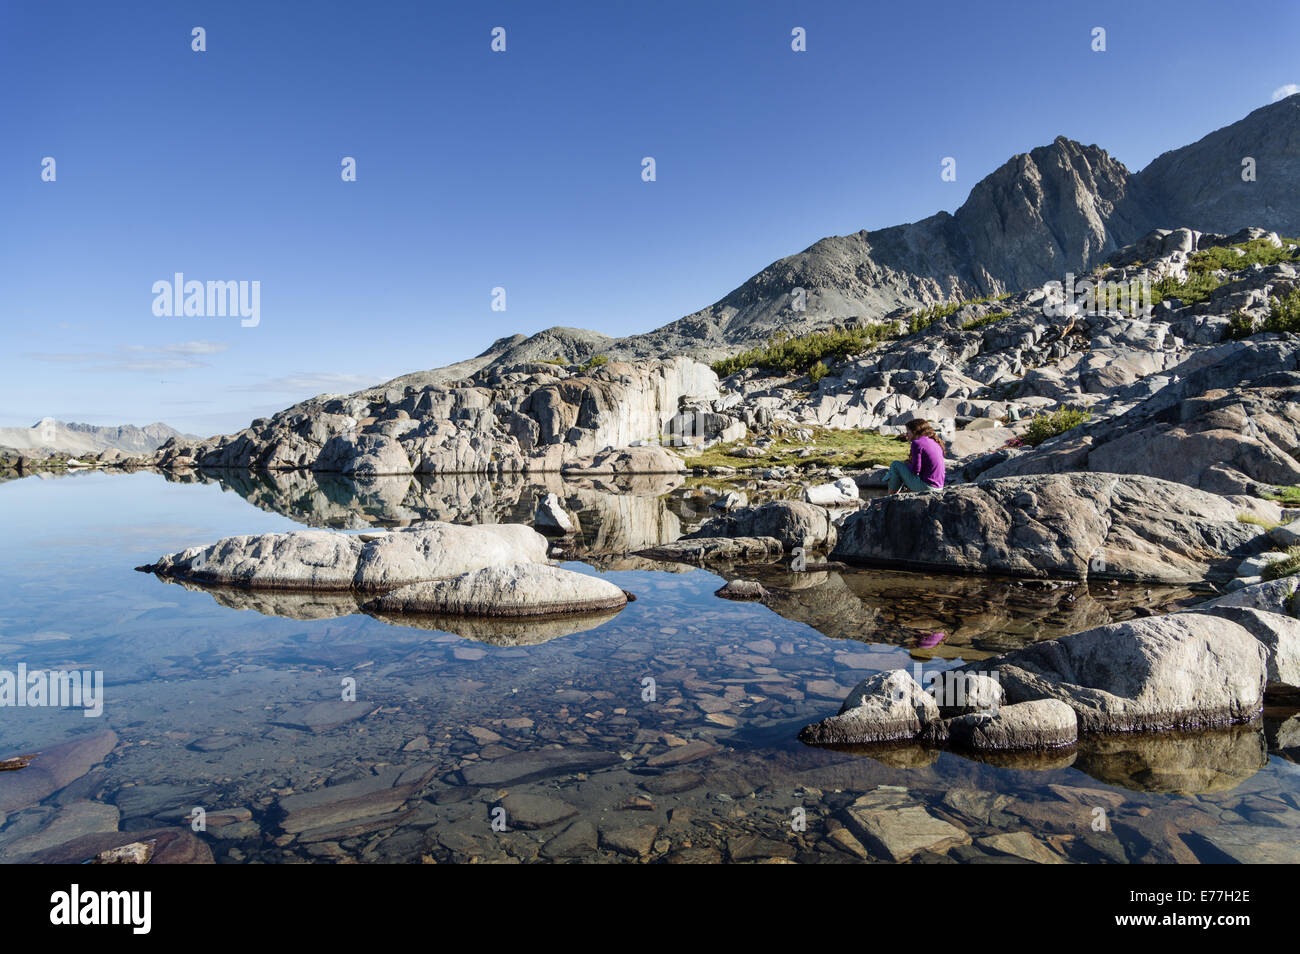 woman sitting on rock by still mountain lake in the morning Stock Photo